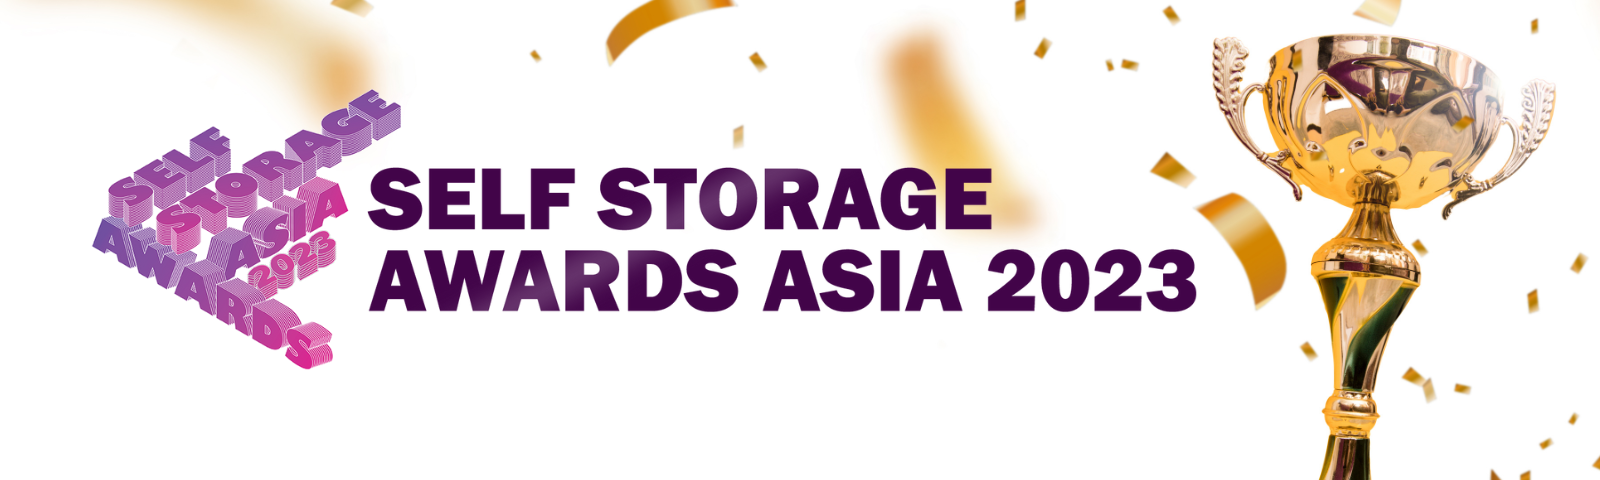 BEAM Storage Wins Valet Storage of the Year and the Technology and Innovation Award for Singapore in the Self Storage Association Awards Asia 2023